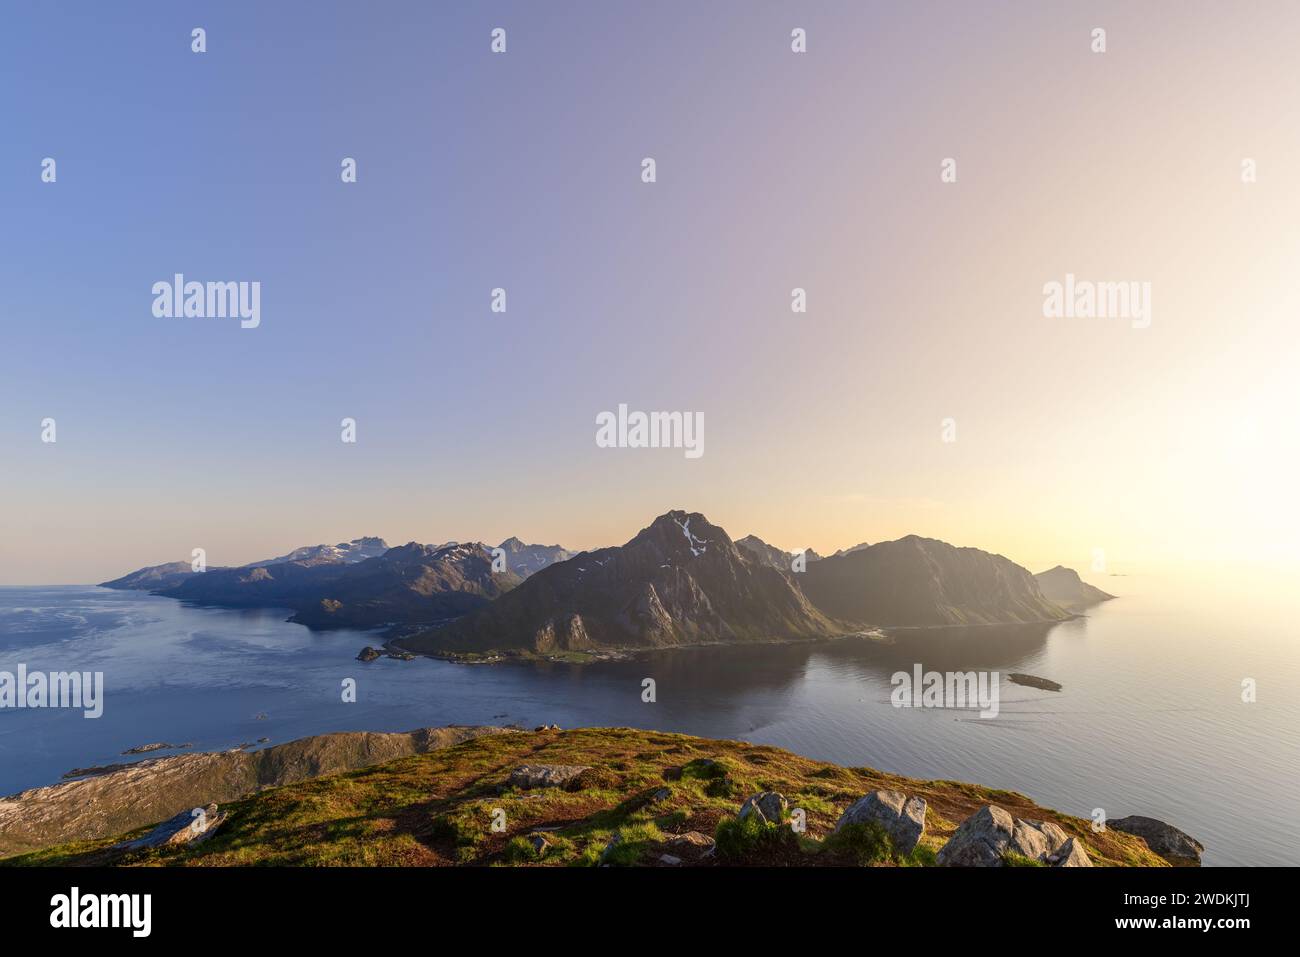 The midnight sun casts a golden glow over the serene landscape of Offersoykammen, overlooking the tranquil Nappstraumen in Lofoten, Norway Stock Photo